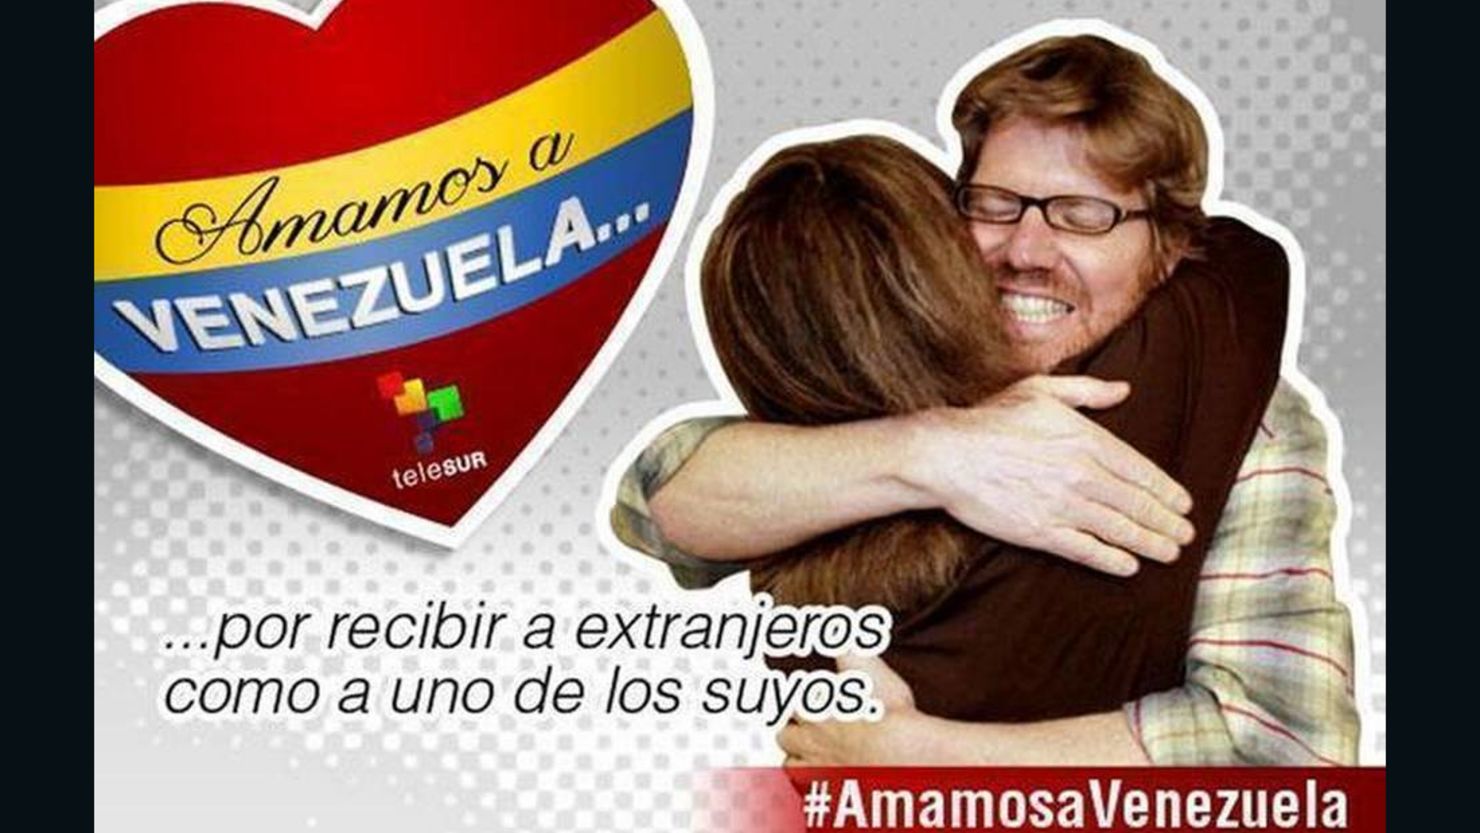 Ad campaign in Venezuela featured image of journalist Jim Wyss, who was detained for 48 hours in 2013. 